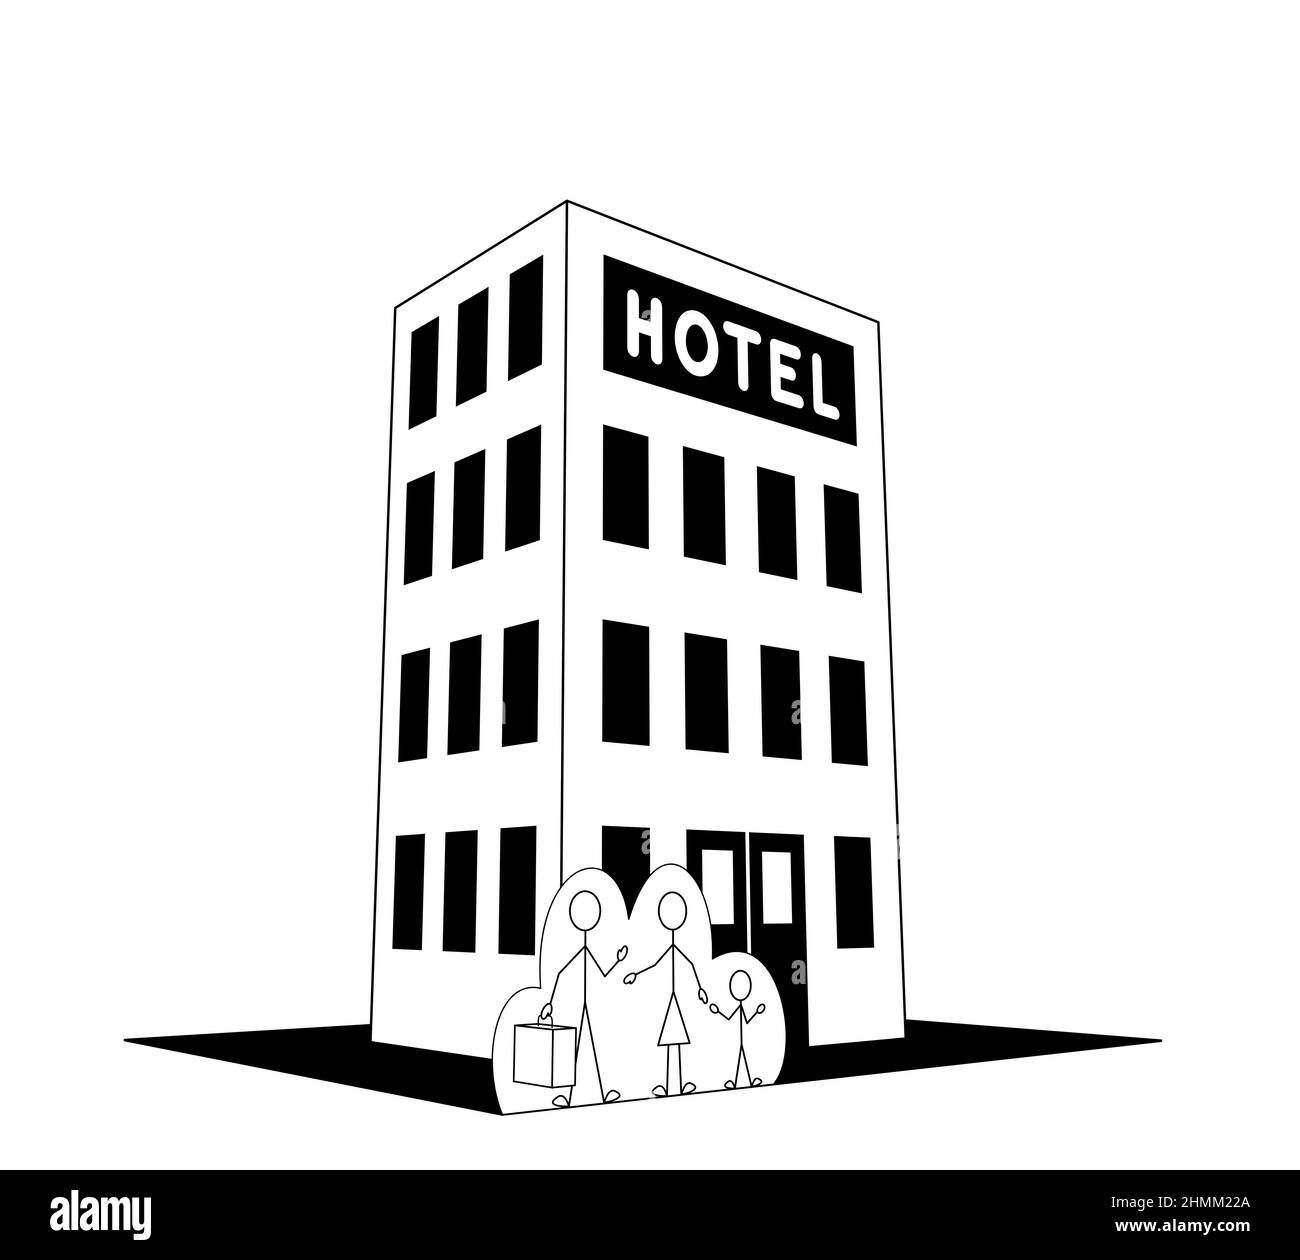 Free: Hotel building drawing, vintage architecture | Free Photo - rawpixel  - nohat.cc